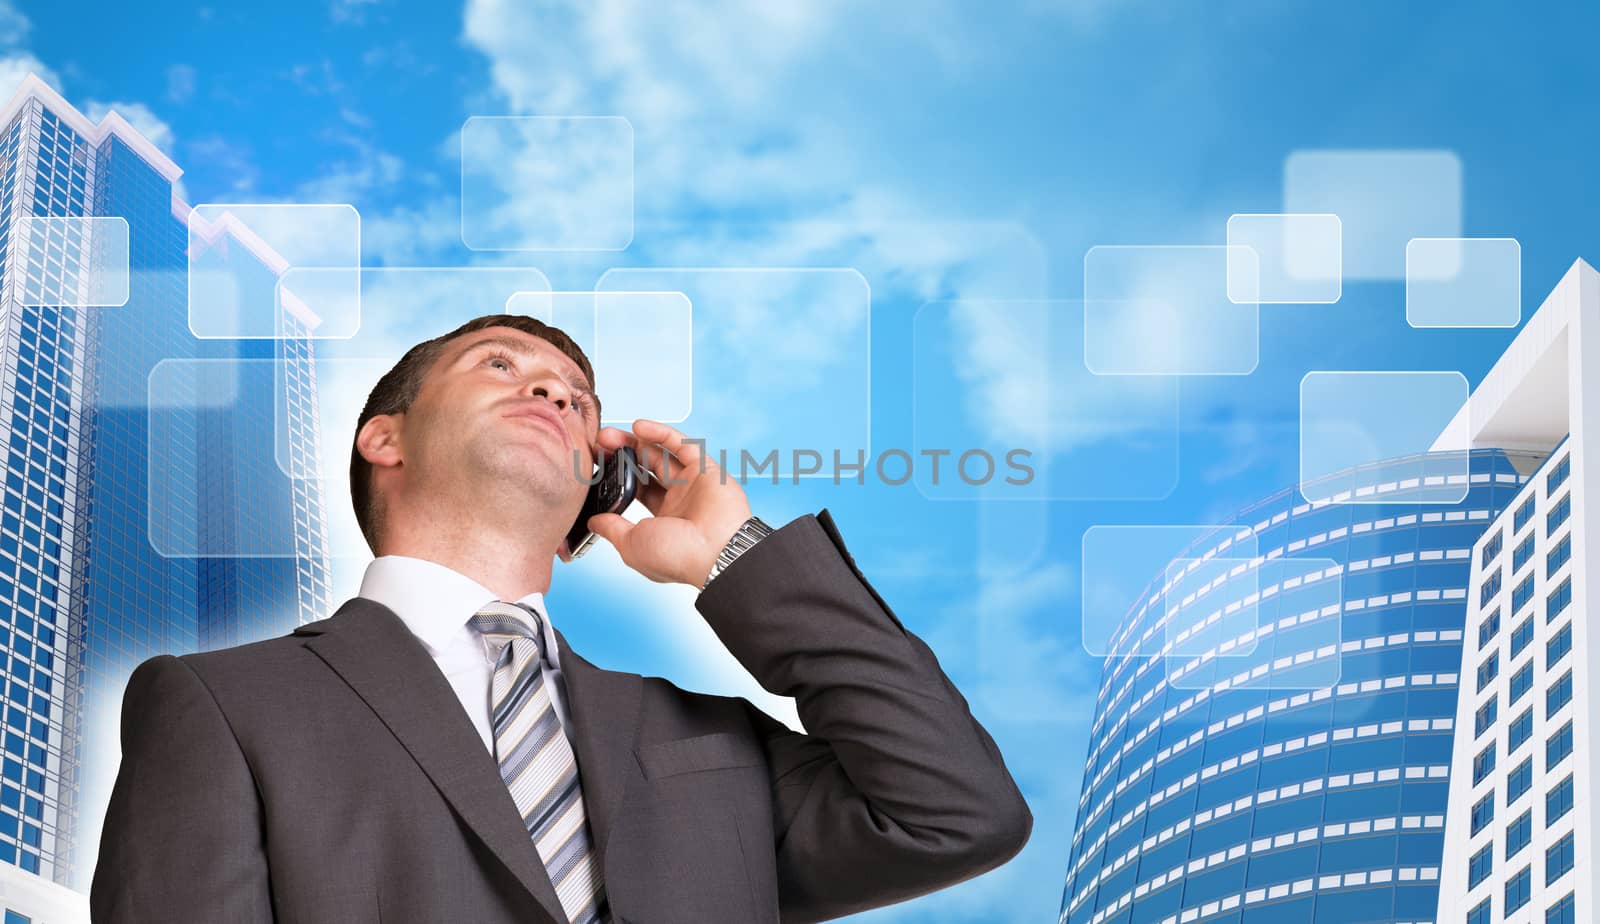 Businessman talking on the phone. Skyscrapers and sky with transparent rectangles in background